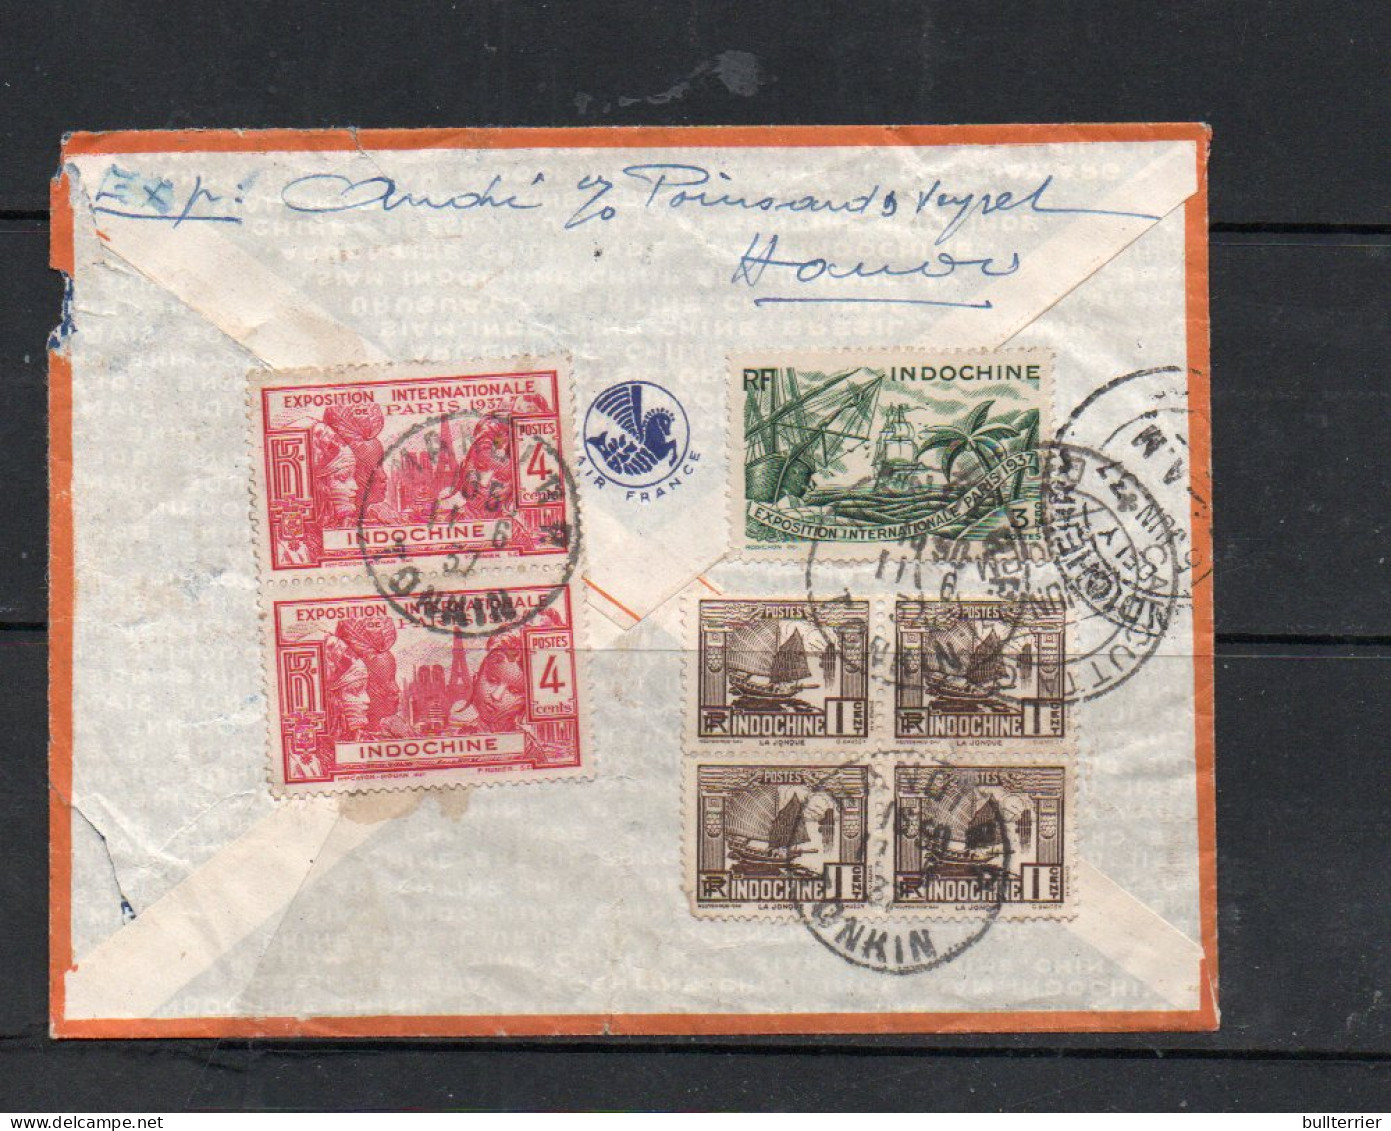 INDOCHINA - 1937 - AIRMAIL COVER HANOI TO PONDICHERRY FRENCH INDIA WITH BACKSTAMPS - Poste Aérienne